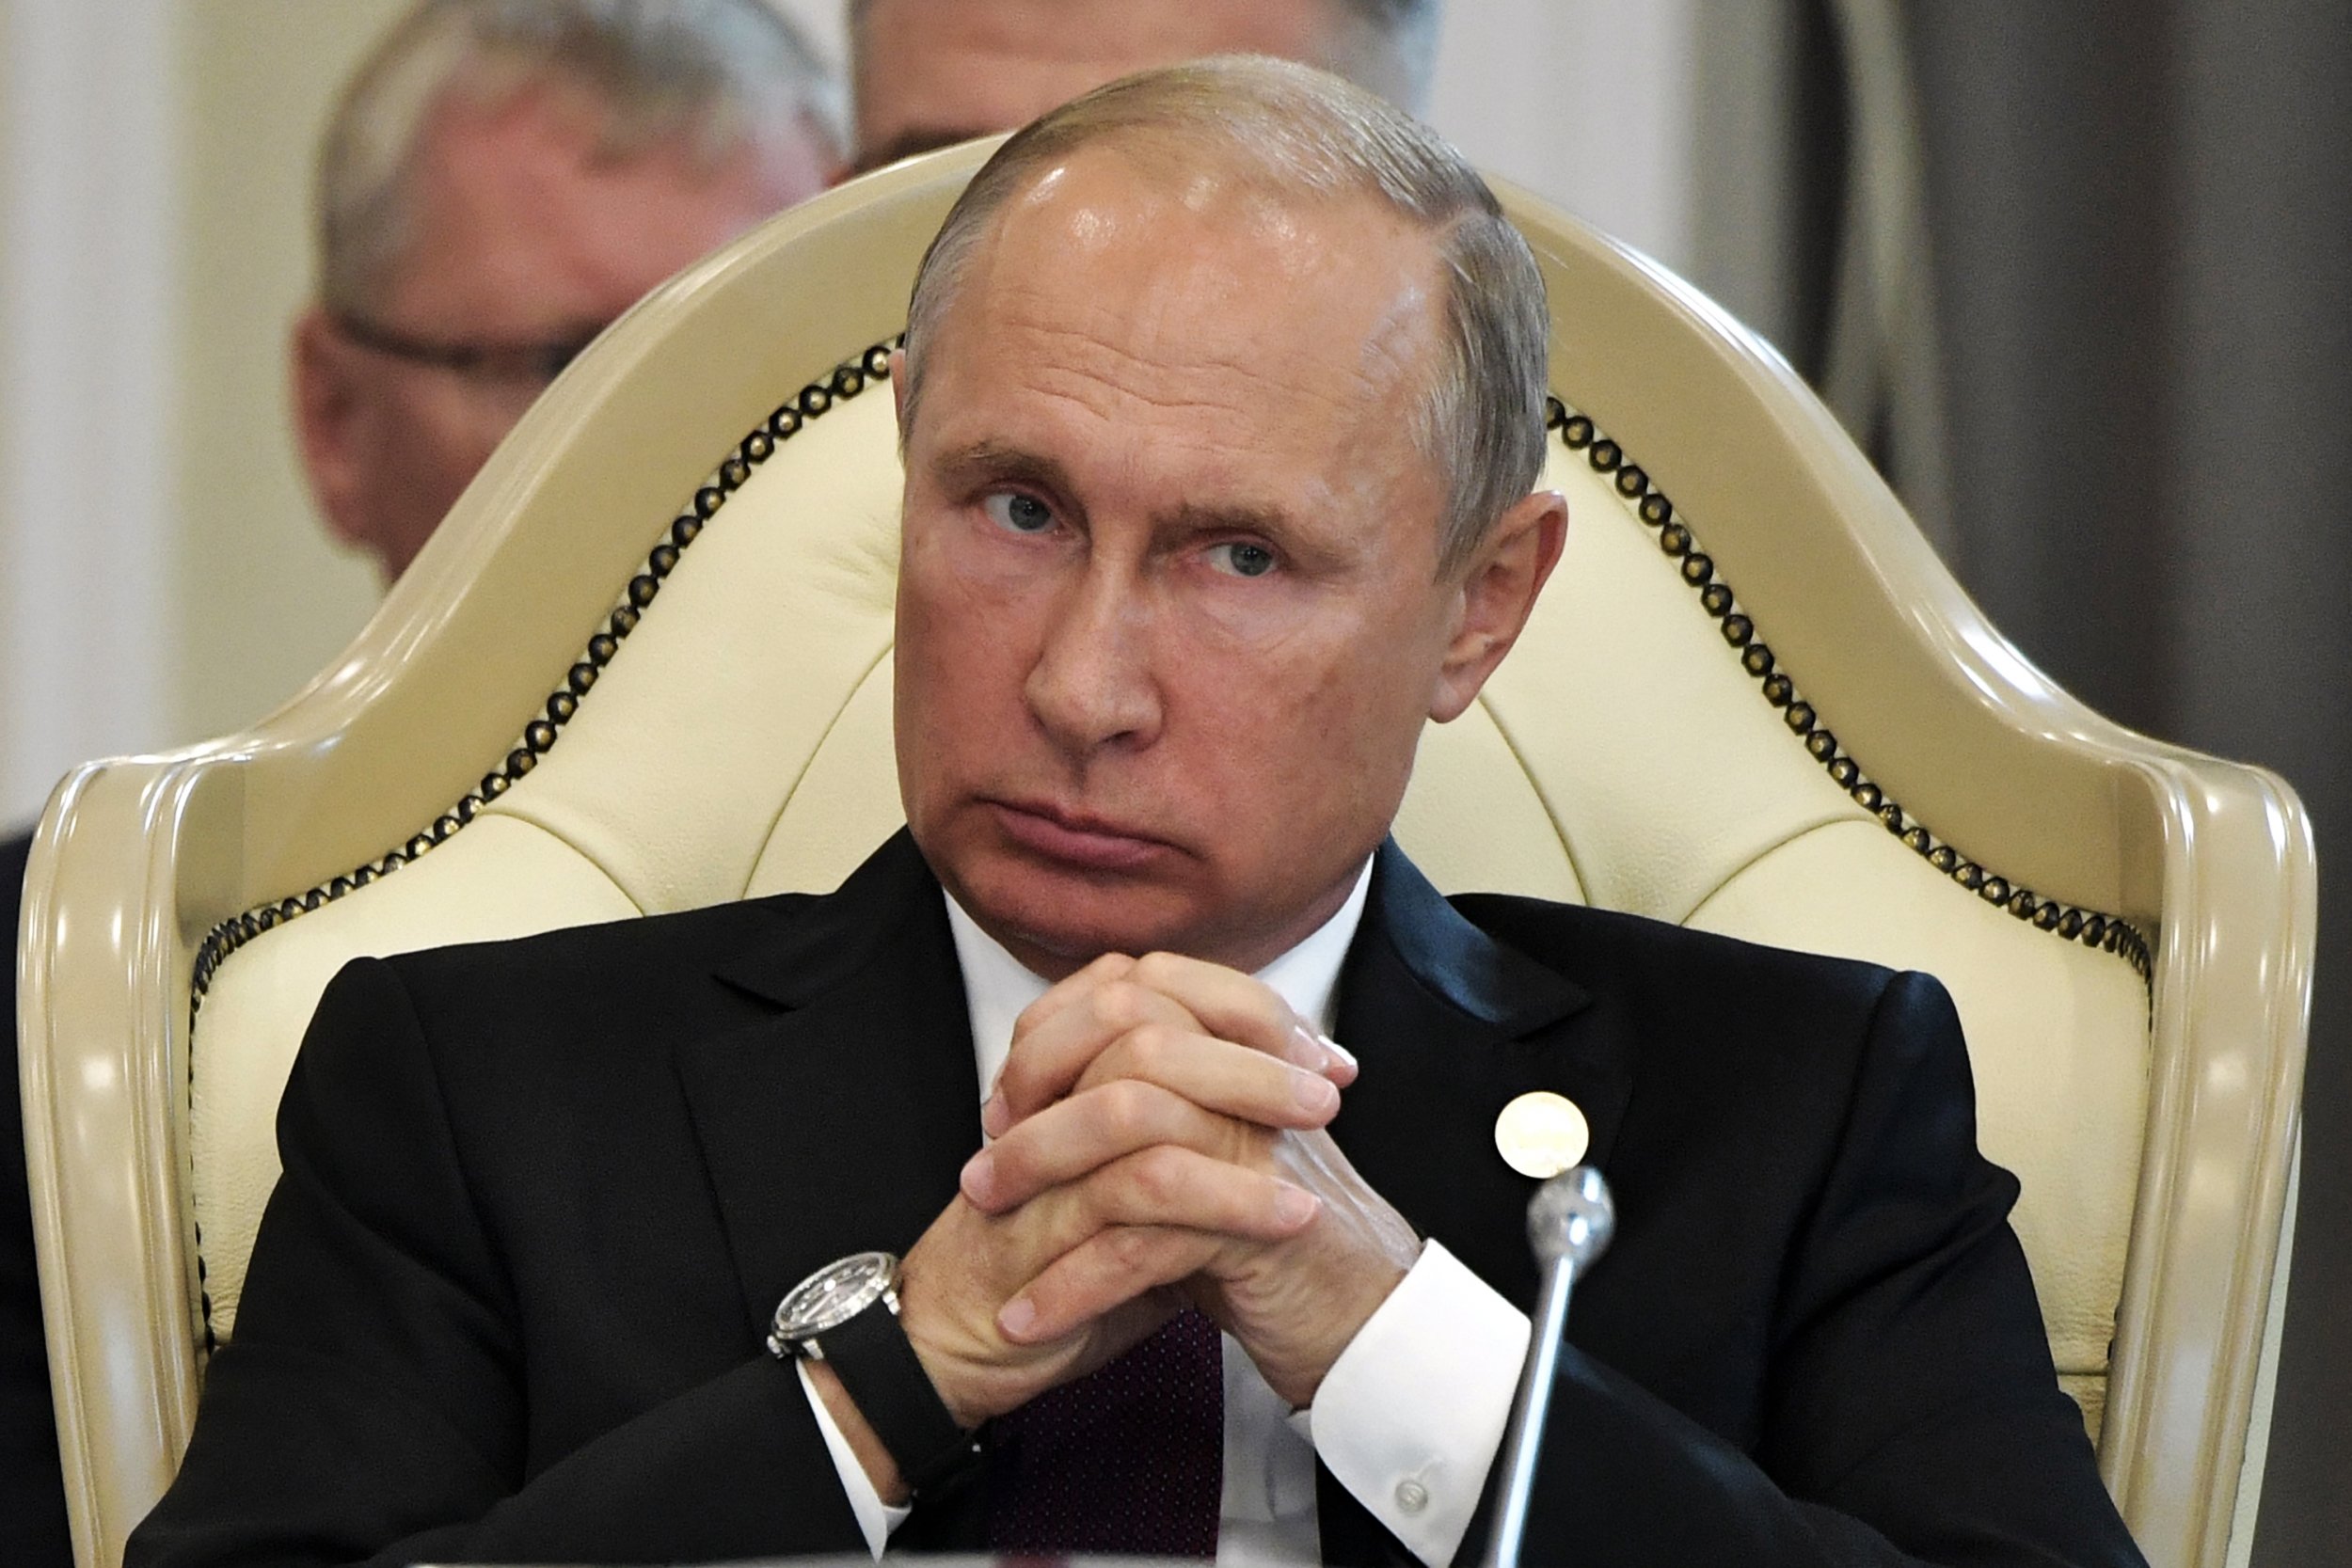 Will Russia Hit Back at New U.S. Sanctions? Putin Considering His Options